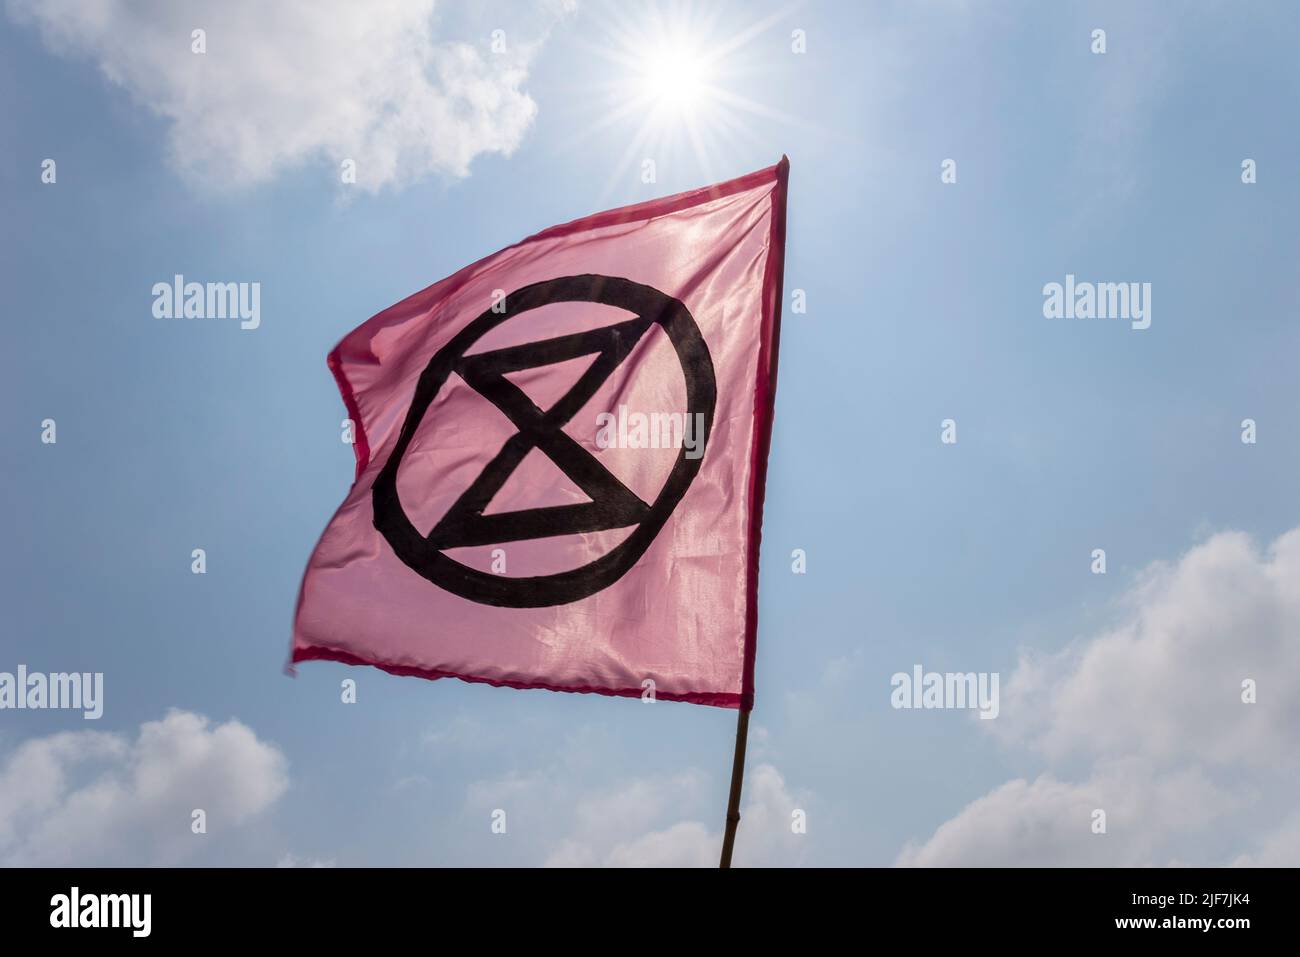 Extinction Rebellion flag, with hourglass symbol, under a bright sun. Global warming, climate change activism. Flown during sewage protest in Southend Stock Photo